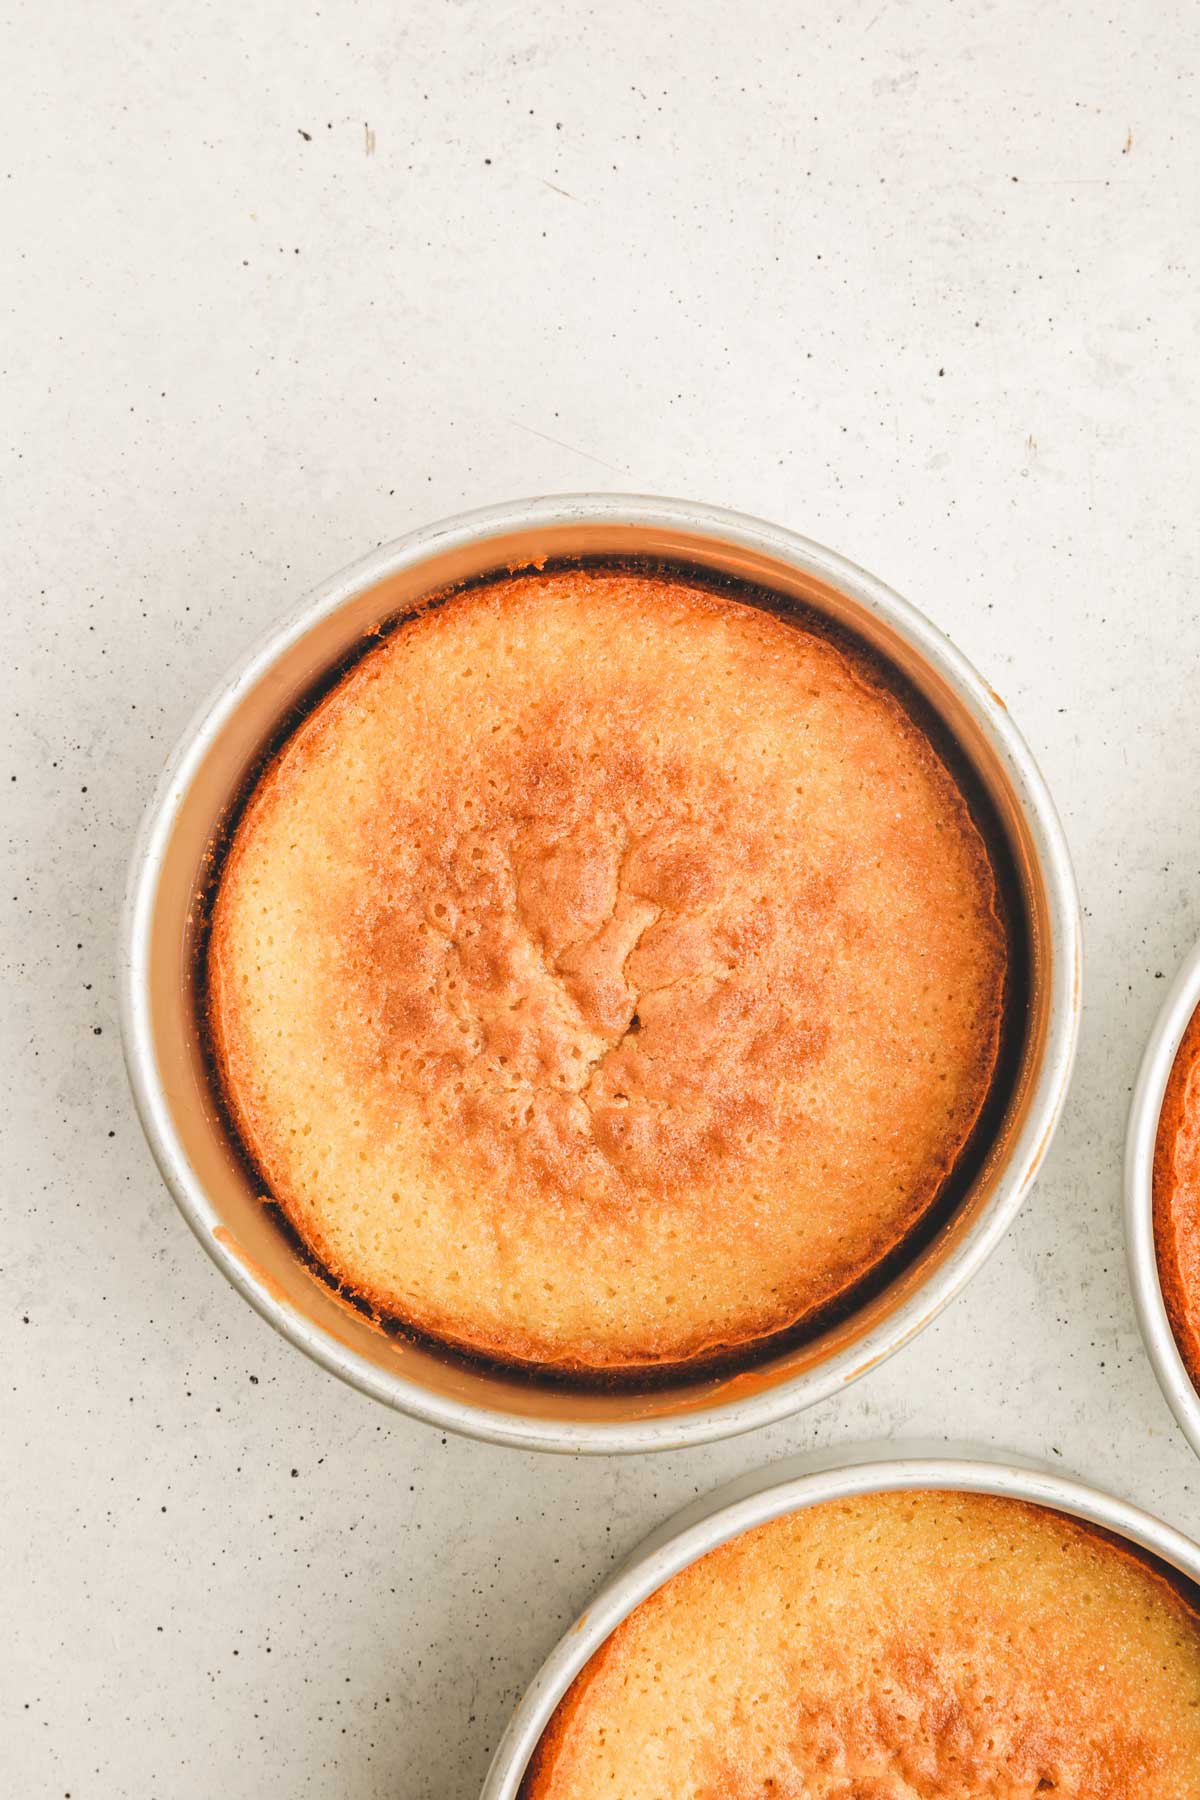 cake pan with a sponge cake baked